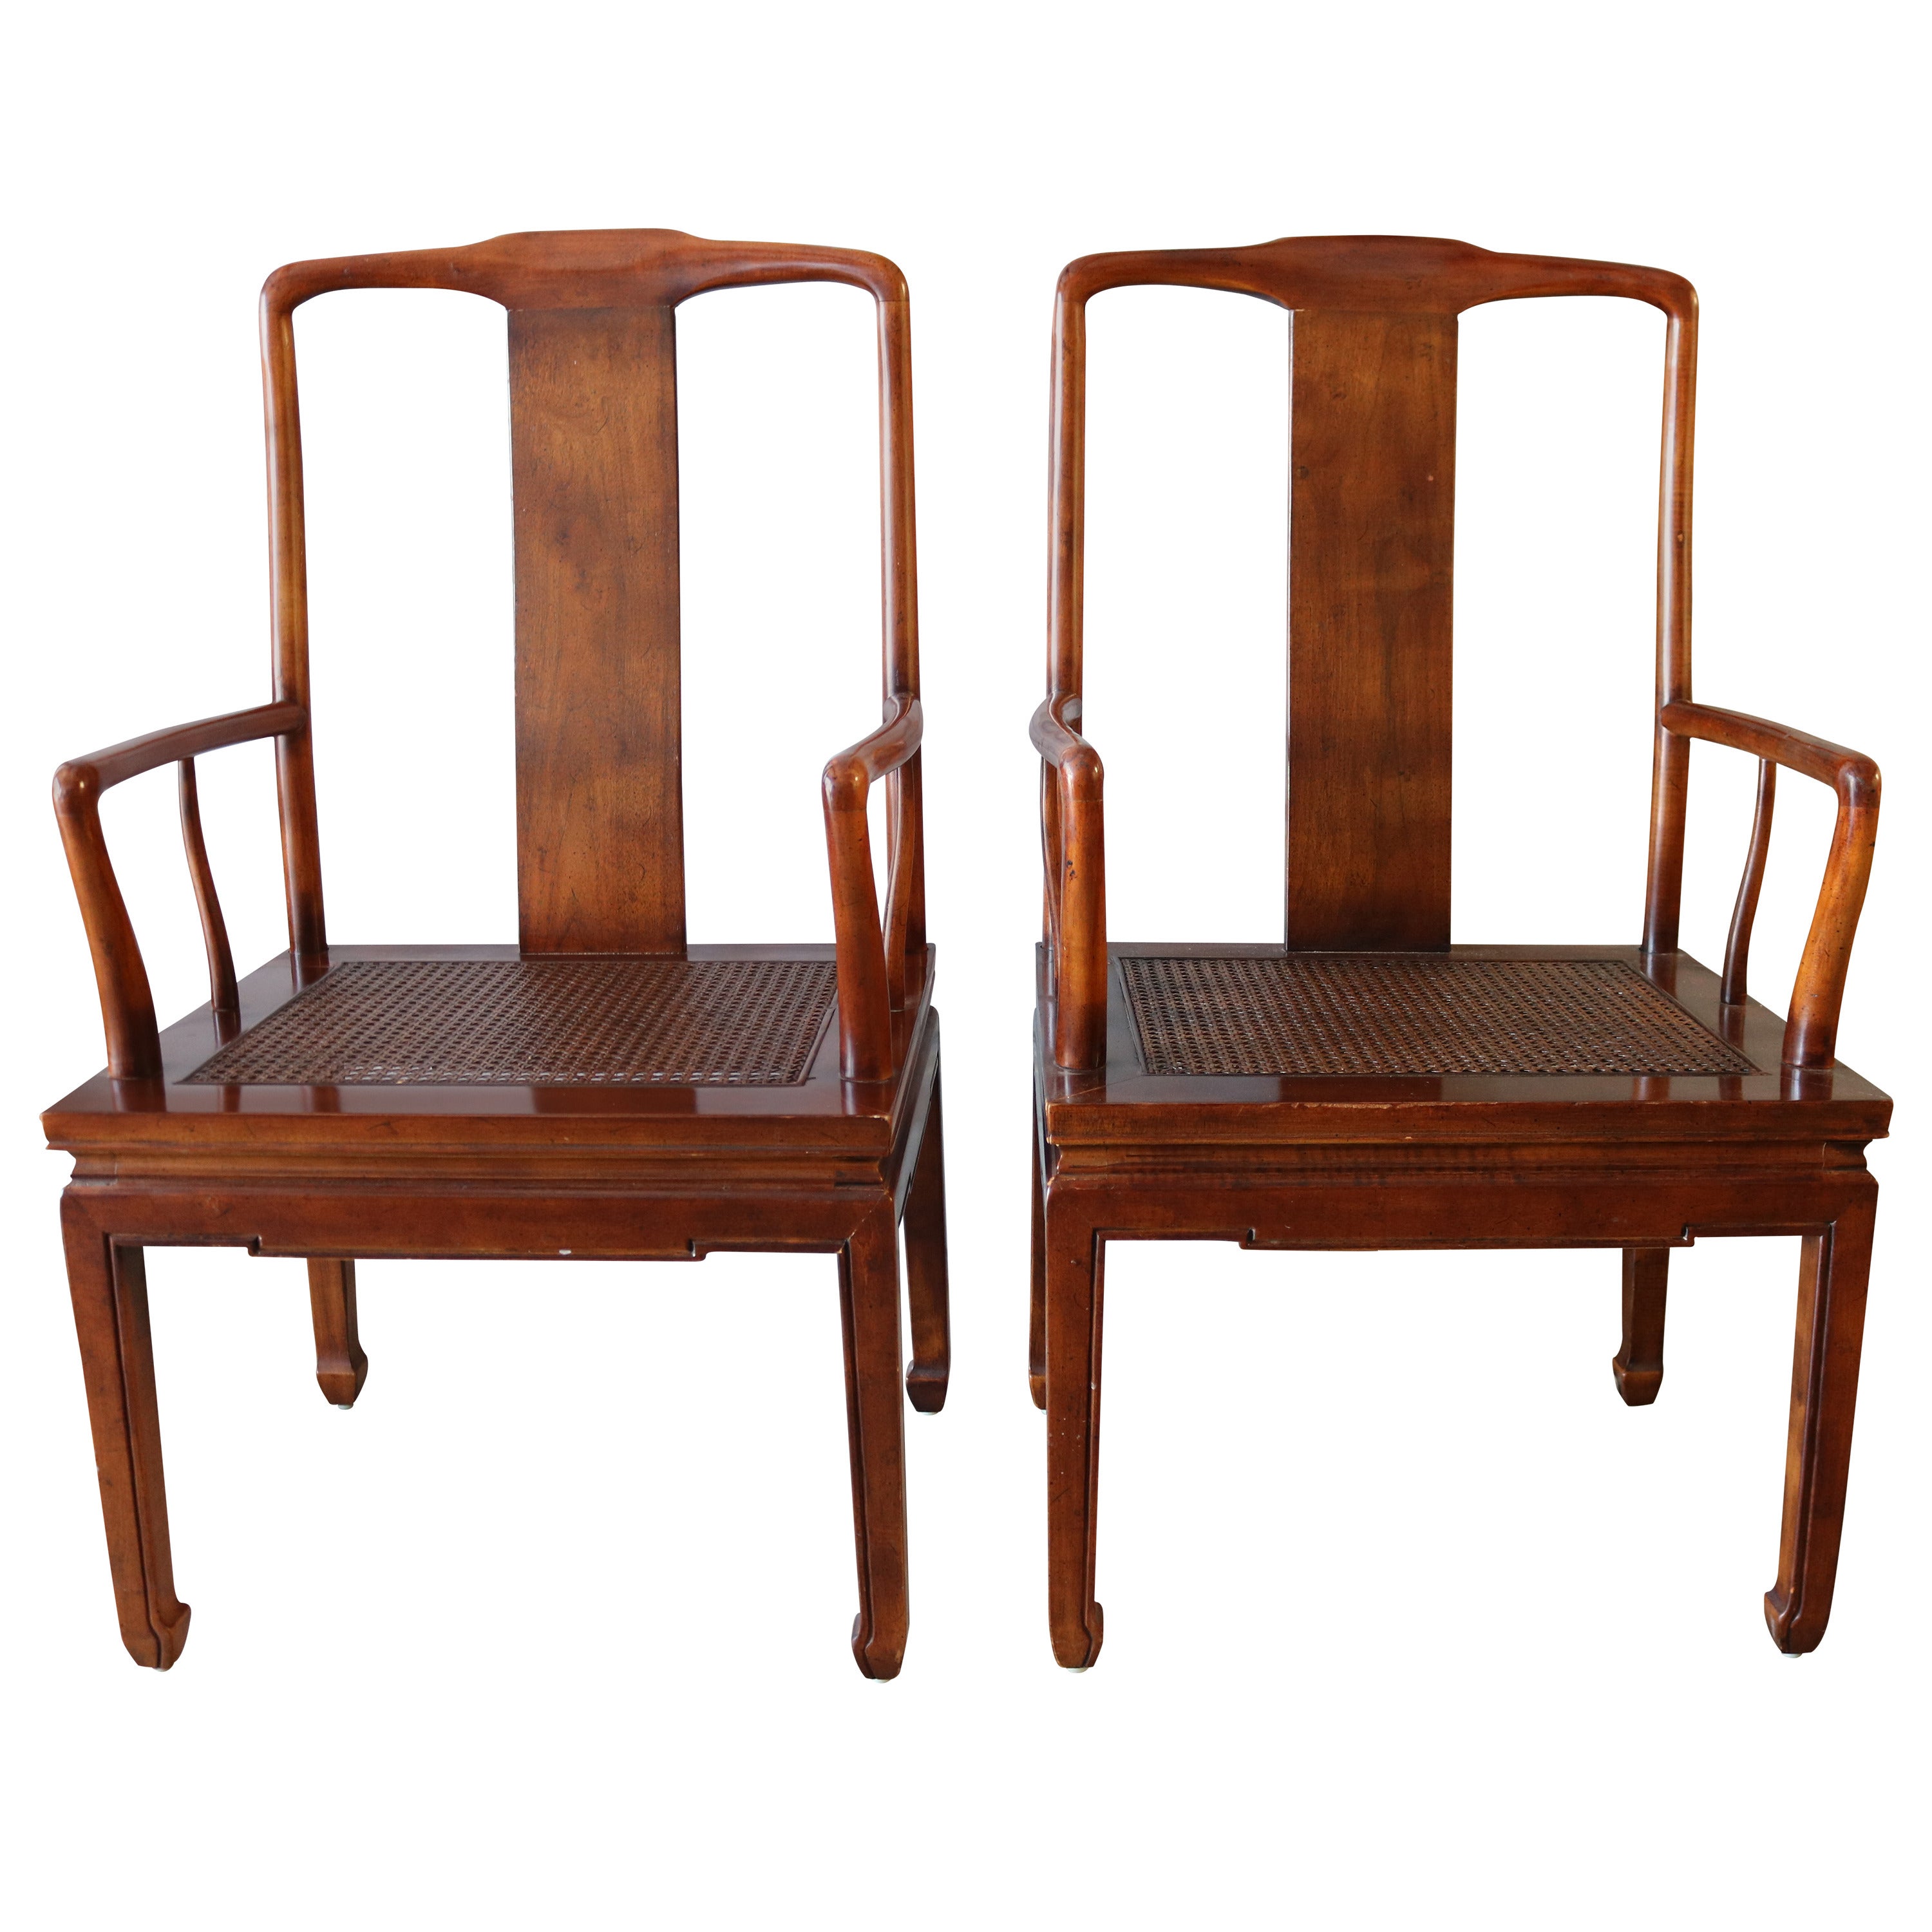 Pair of Asian Influenced Caned Armchairs